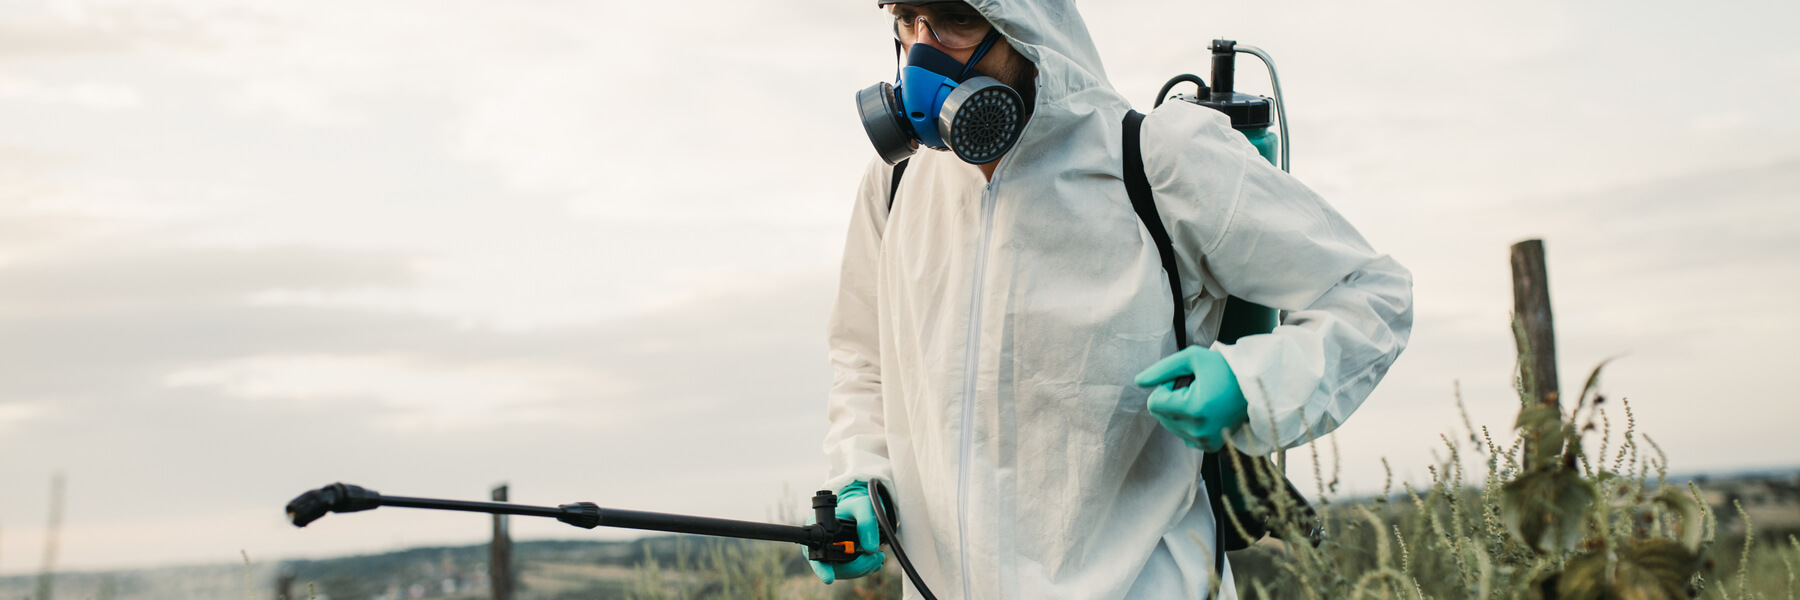 worker in PPE spraying